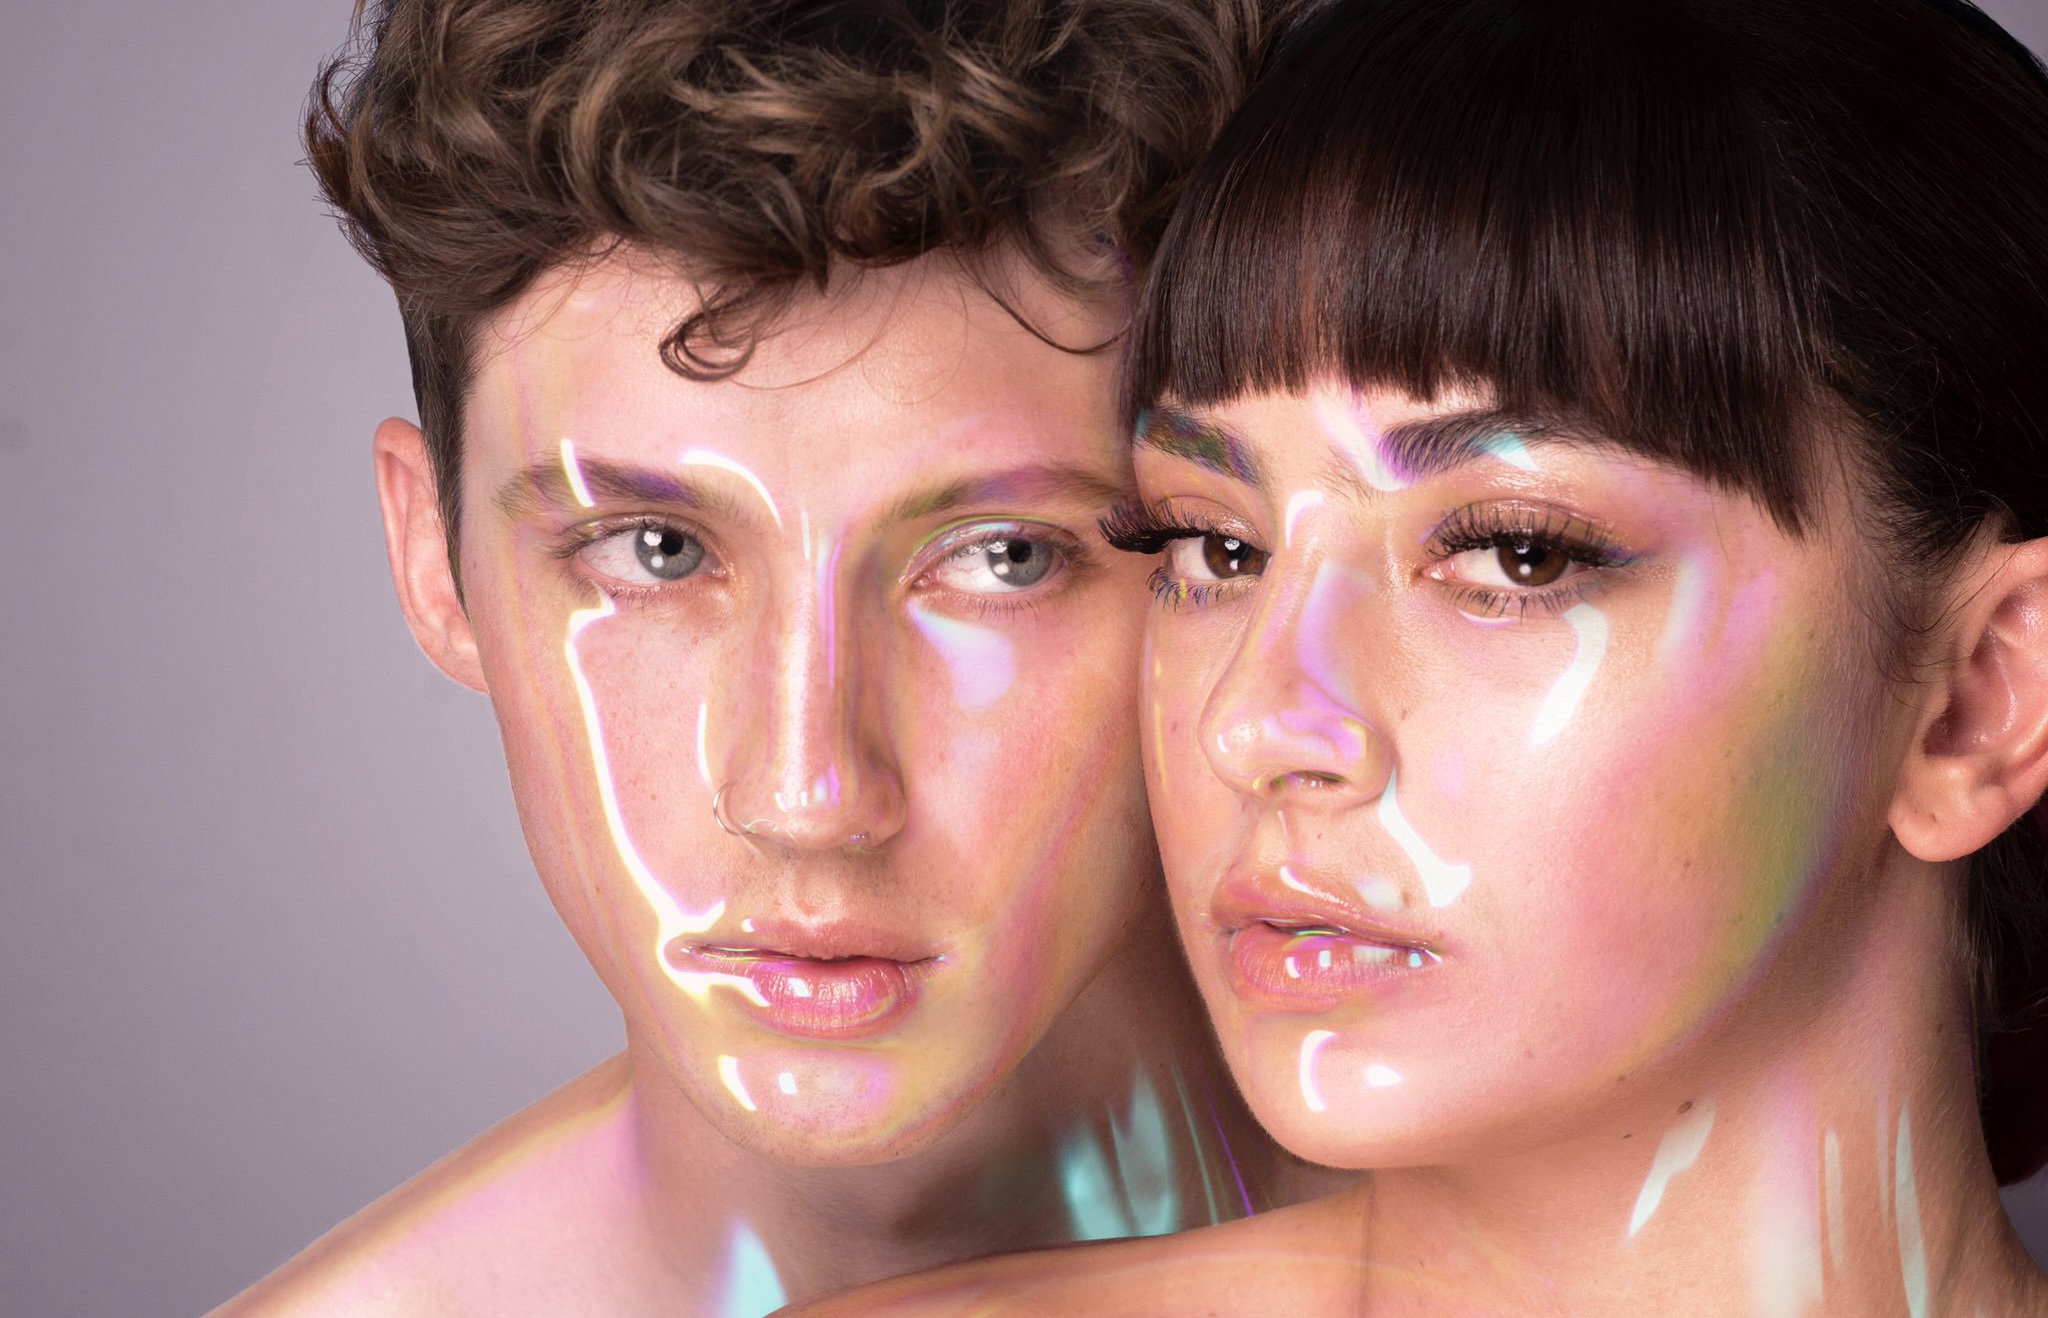 Troye Sivan and Charli XCX are bringing their Sweat tour to Place Bell on Sept. 16